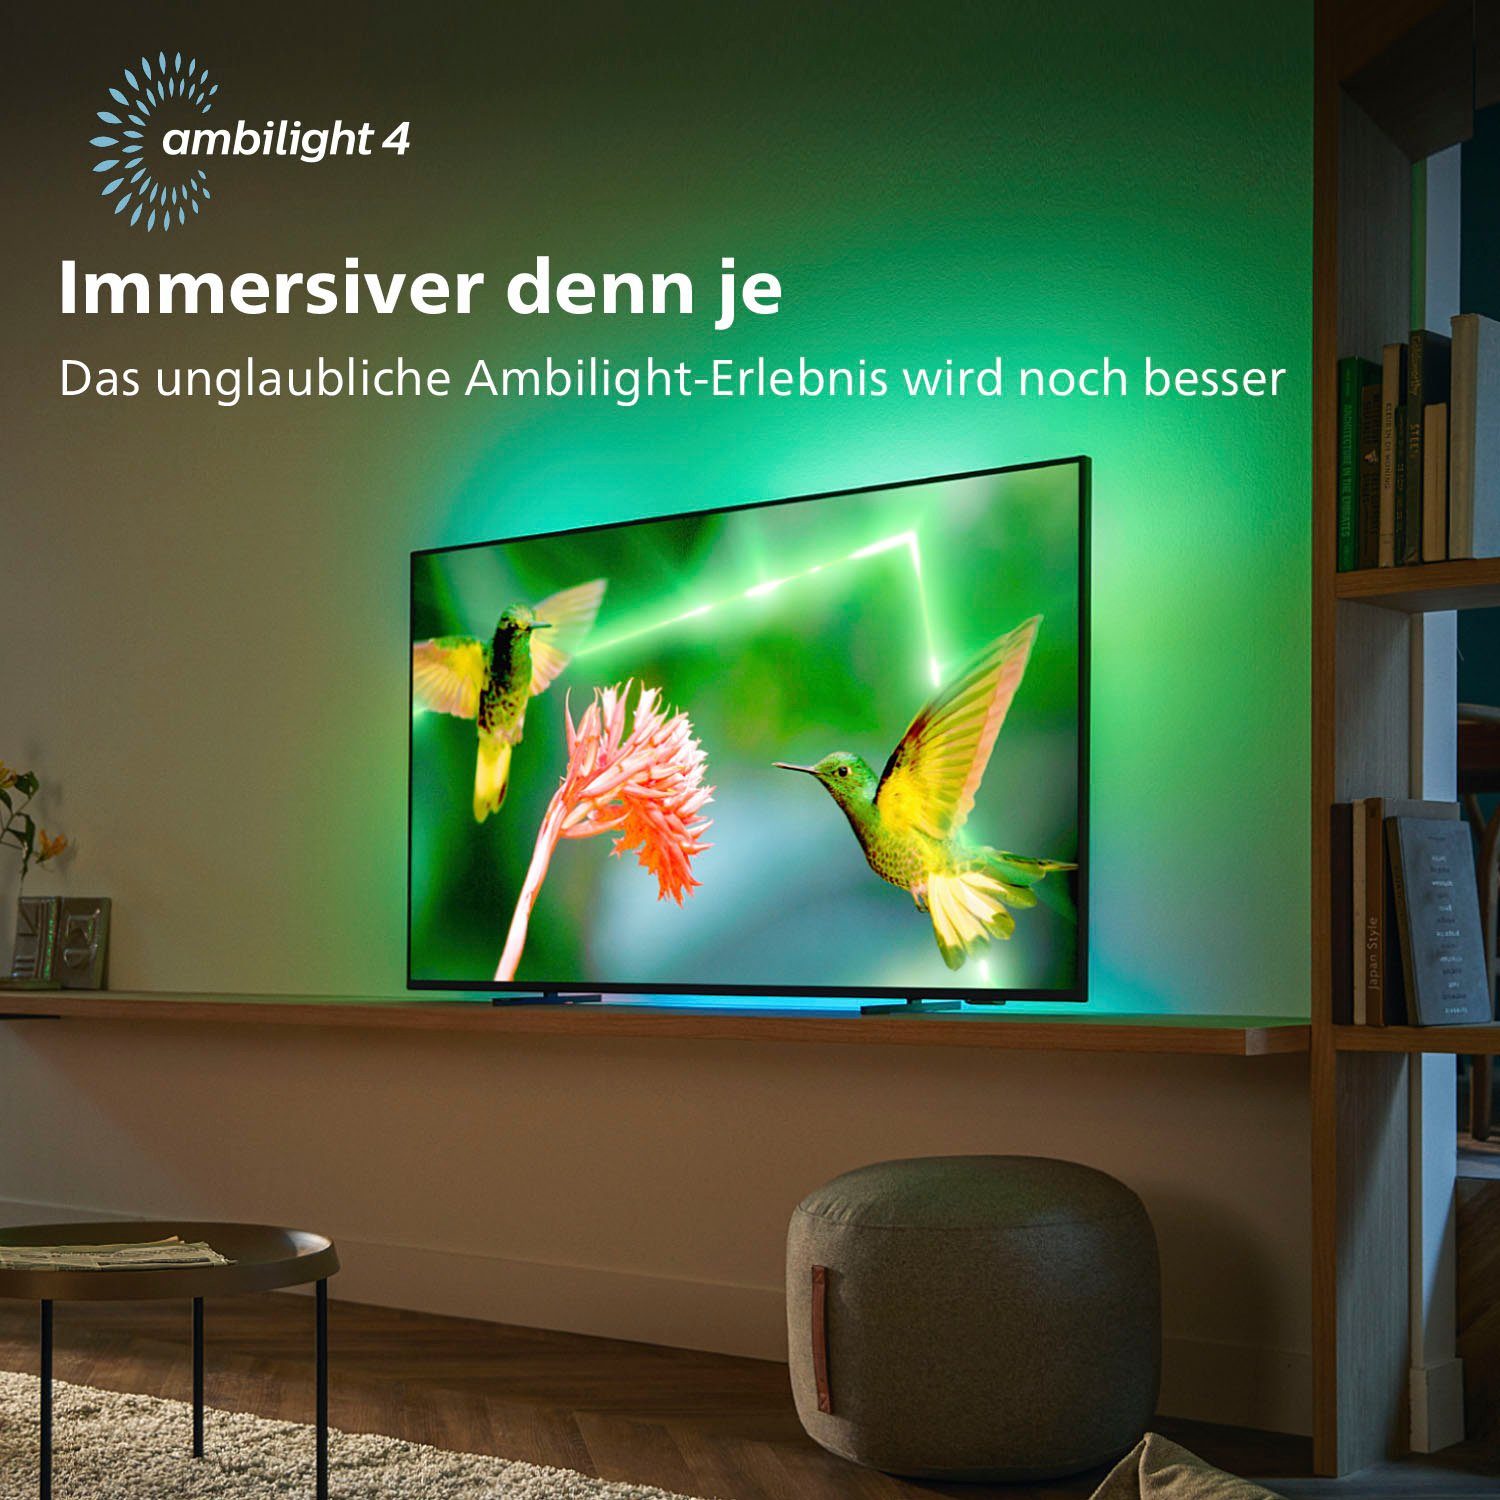 HD, cm/55 (139 55PML9507/12 LED-Fernseher Ultra Zoll, 4K Smart-TV) Philips TV, Android